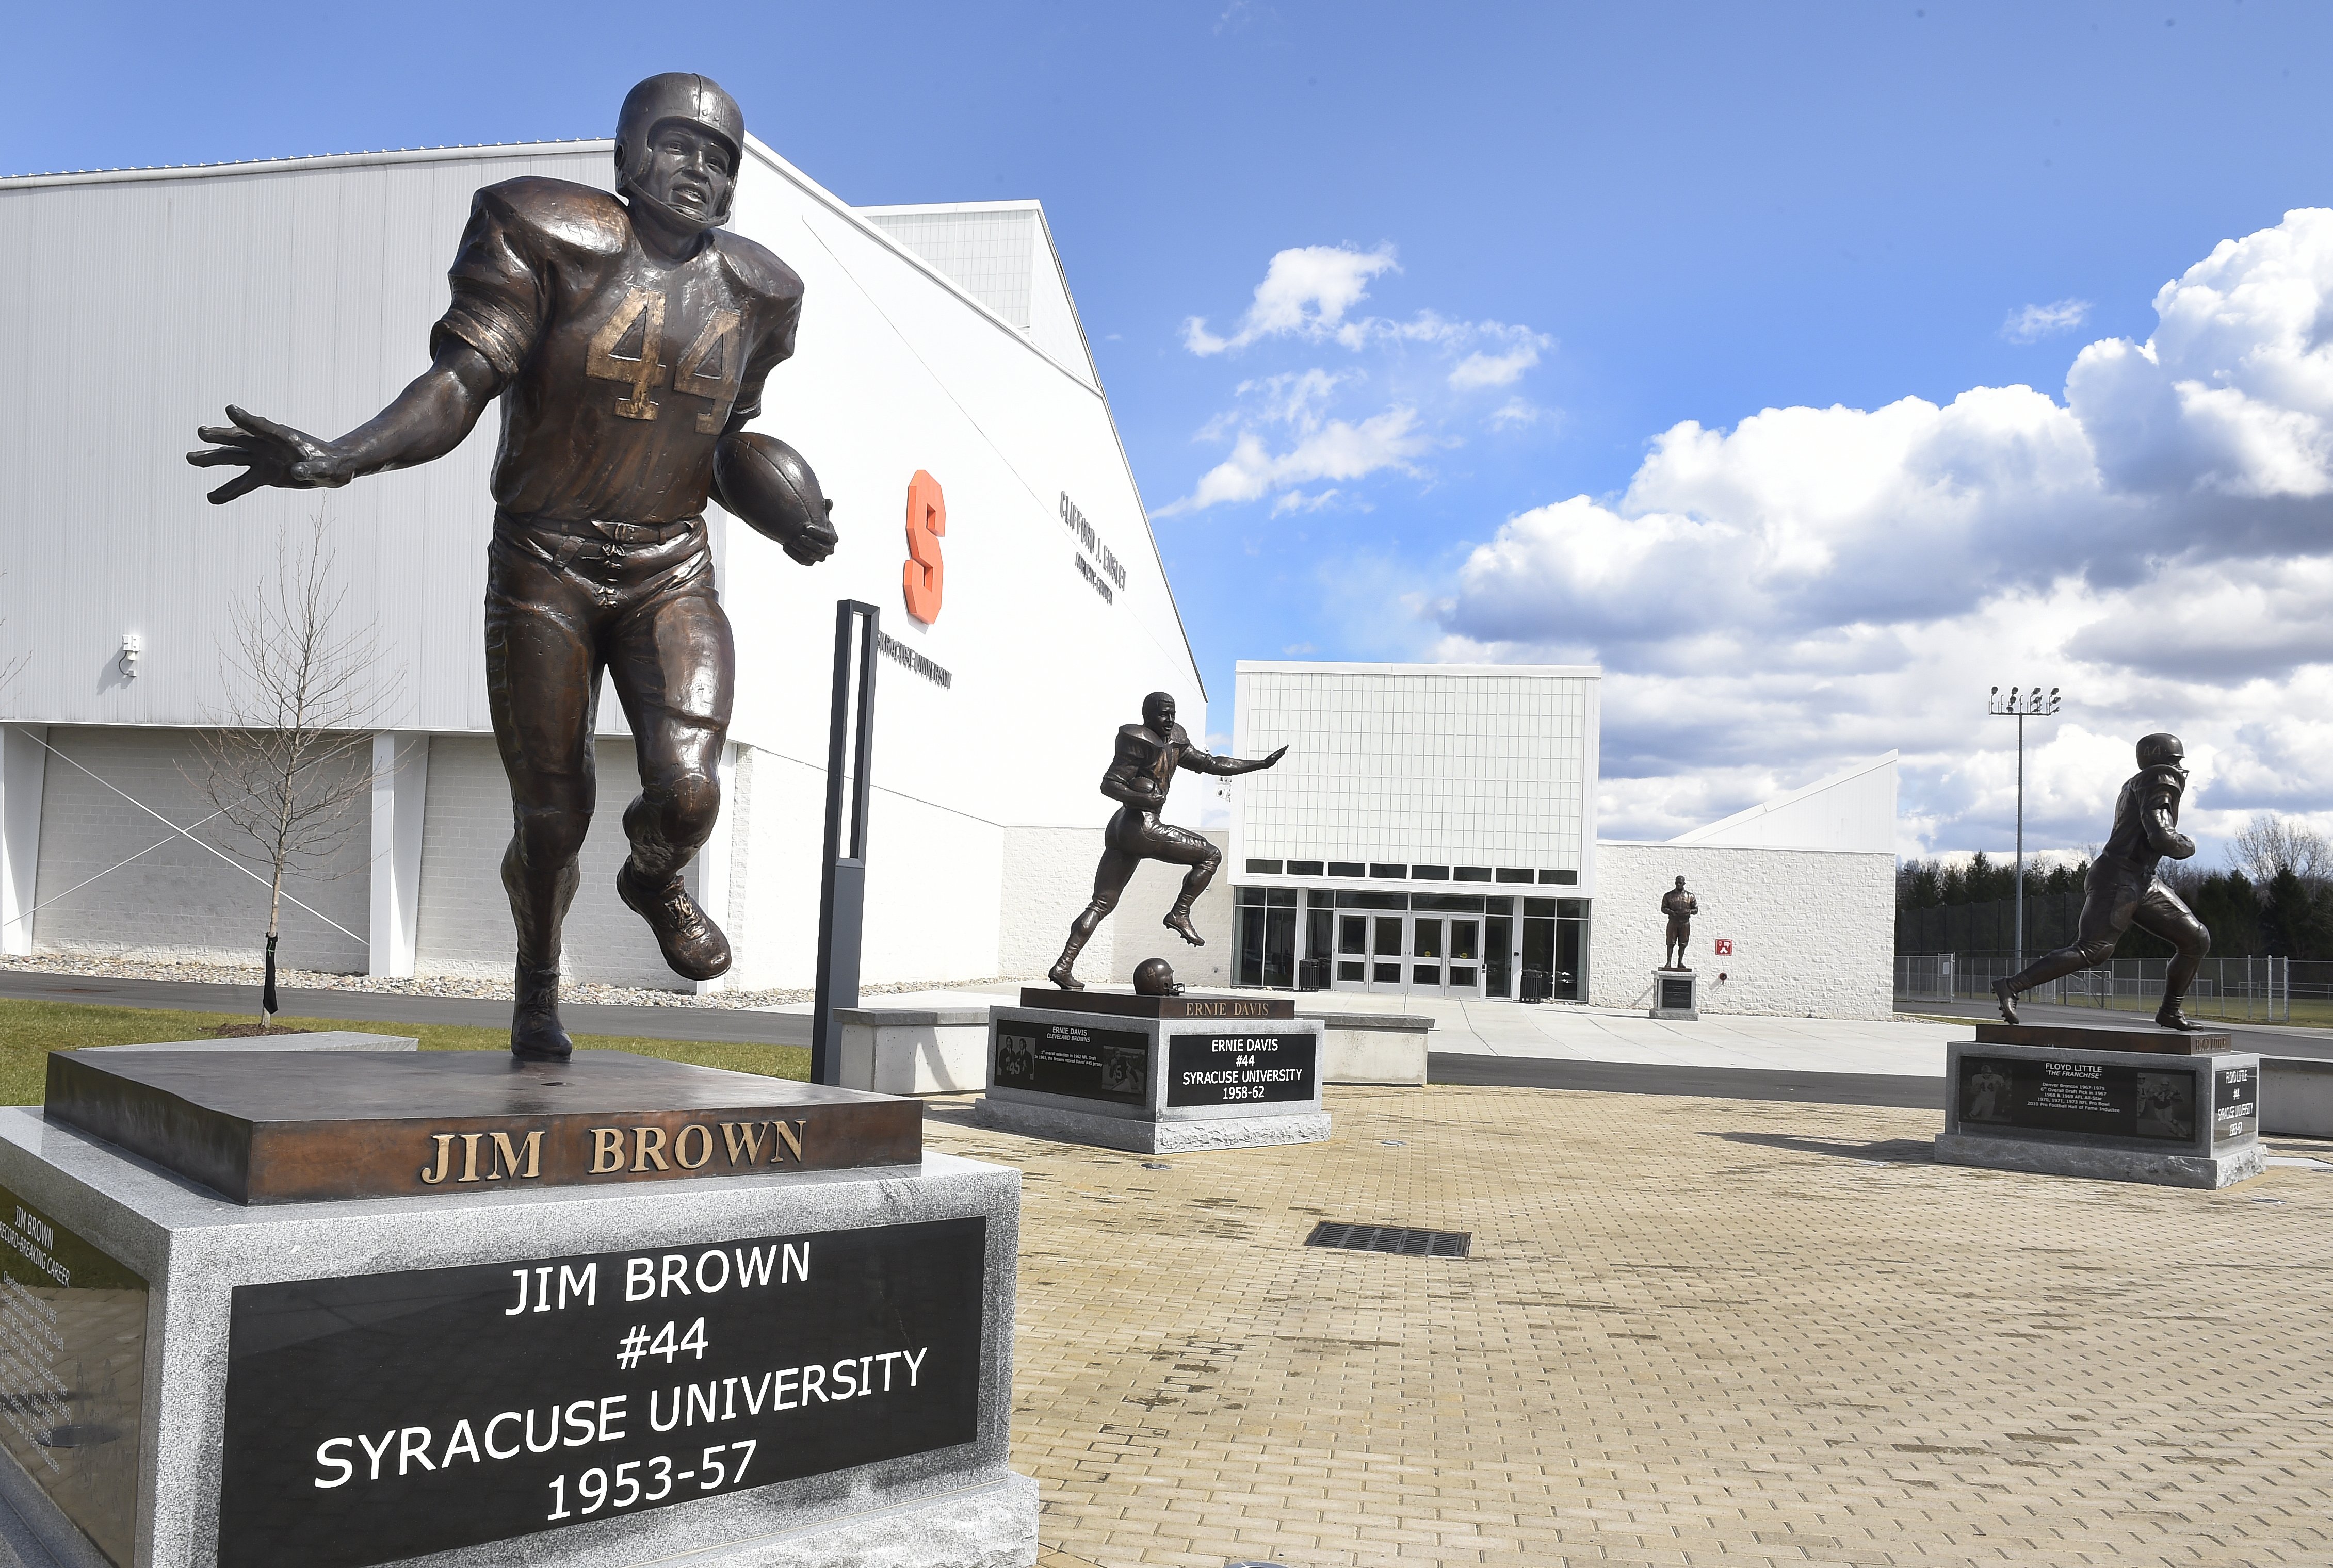 This is the statue courtyard of football super stars at the Clifford J. Ensley Athletic Center, Syracuse University. The statues are of, Jim Brown (from left), Ernie Davis, Floyd "Ben" Schwartzwalder, and Floyd Little.

Ellen M. Blalock | eblalock@syracuse.com